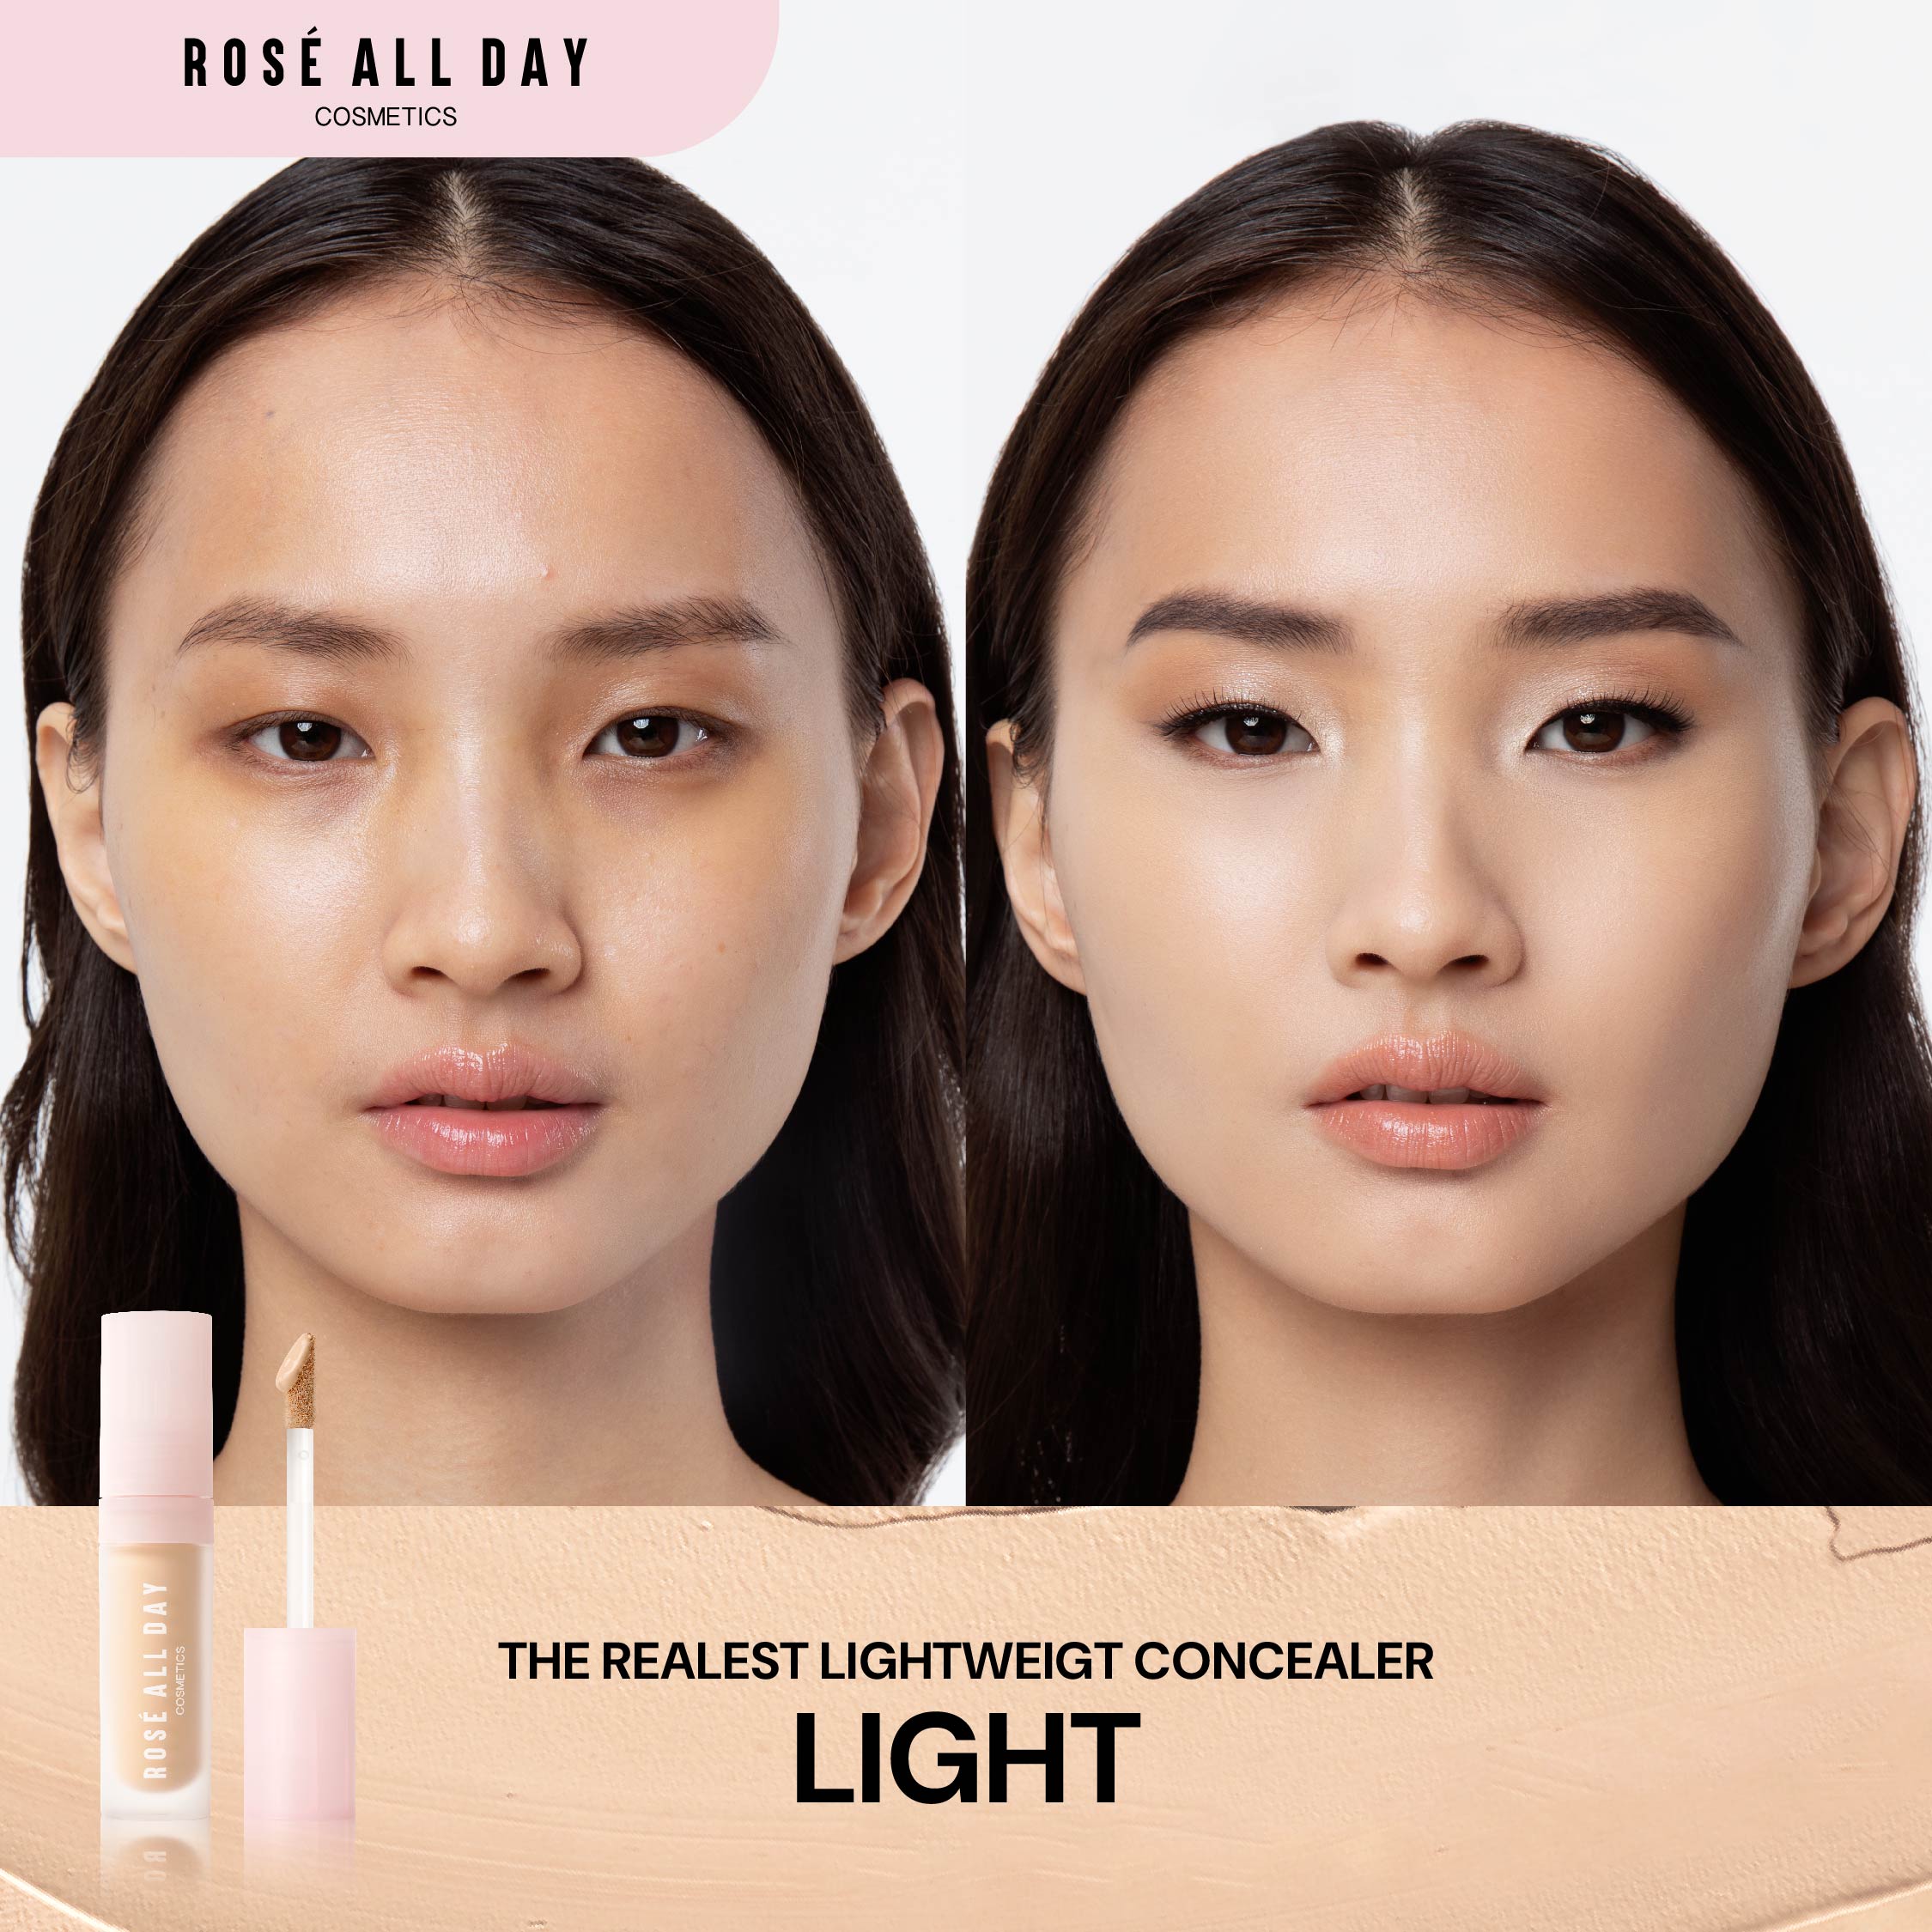 The Realest Lightweight Concealer Mini